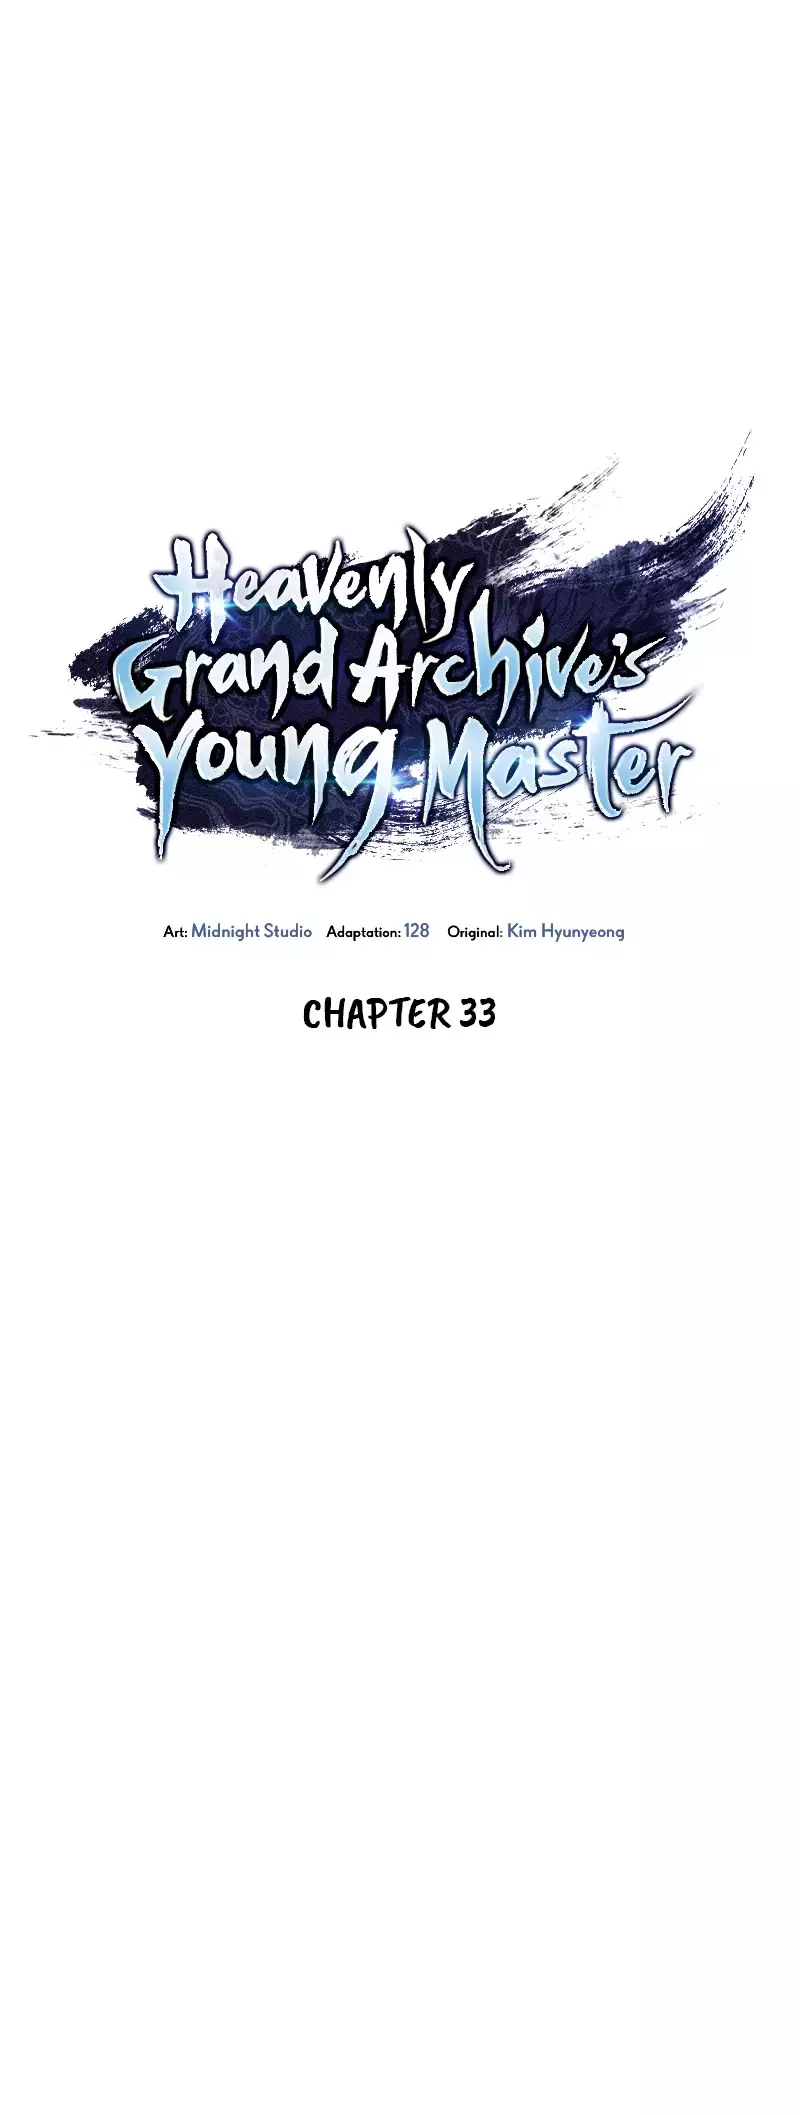 Heavenly Grand Archive’S Young Master - 33 page 17-80d52a16